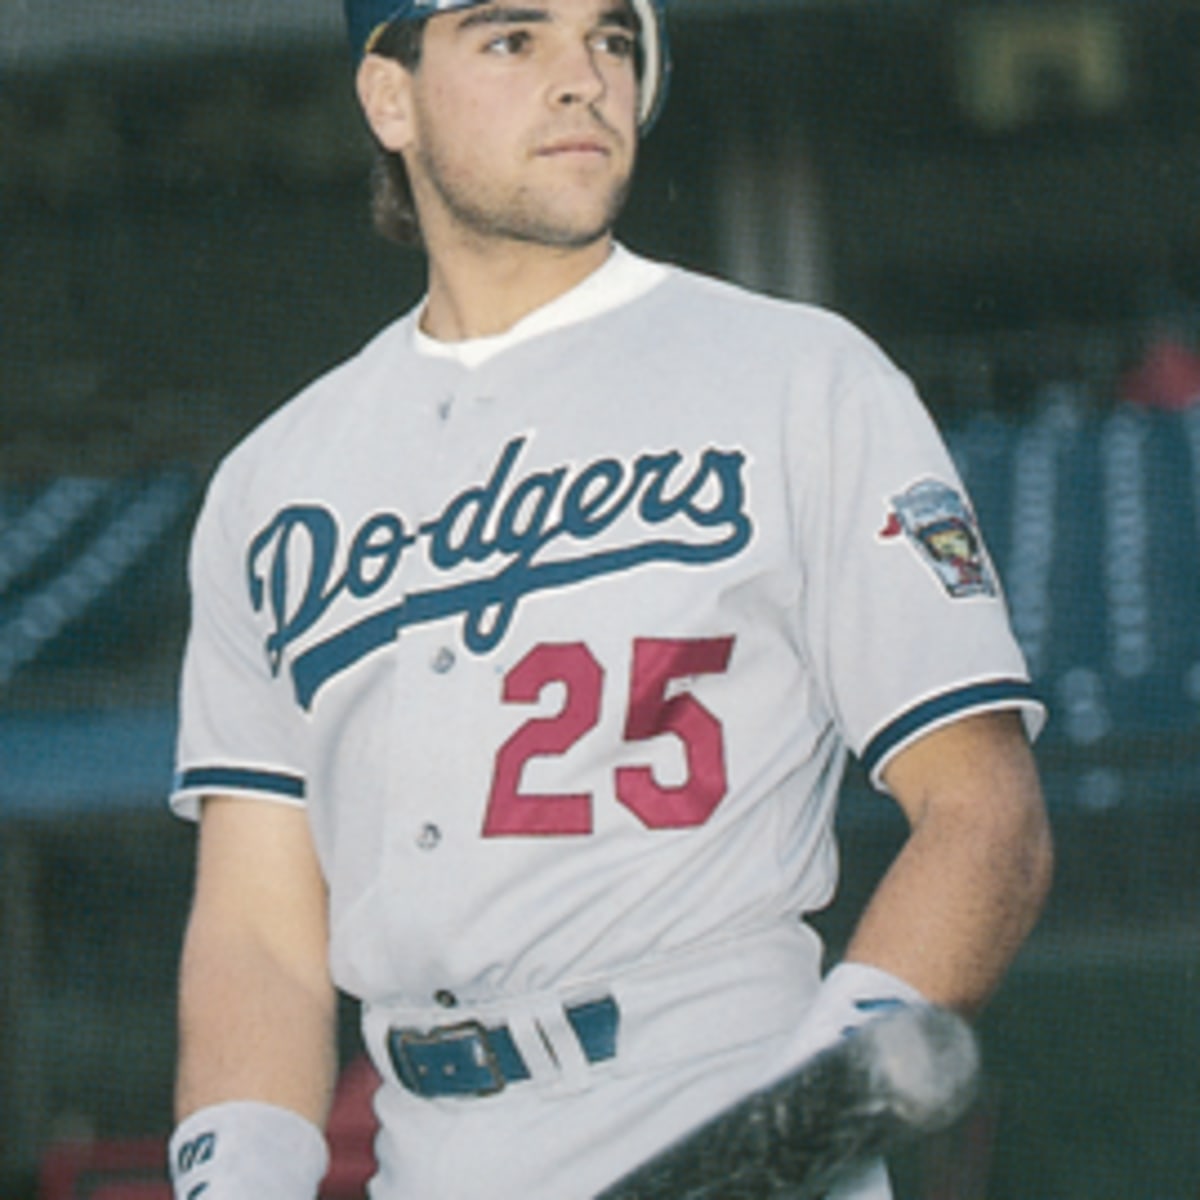 Former Dodgers Catcher Mike Piazza Enters the Hall of Fame